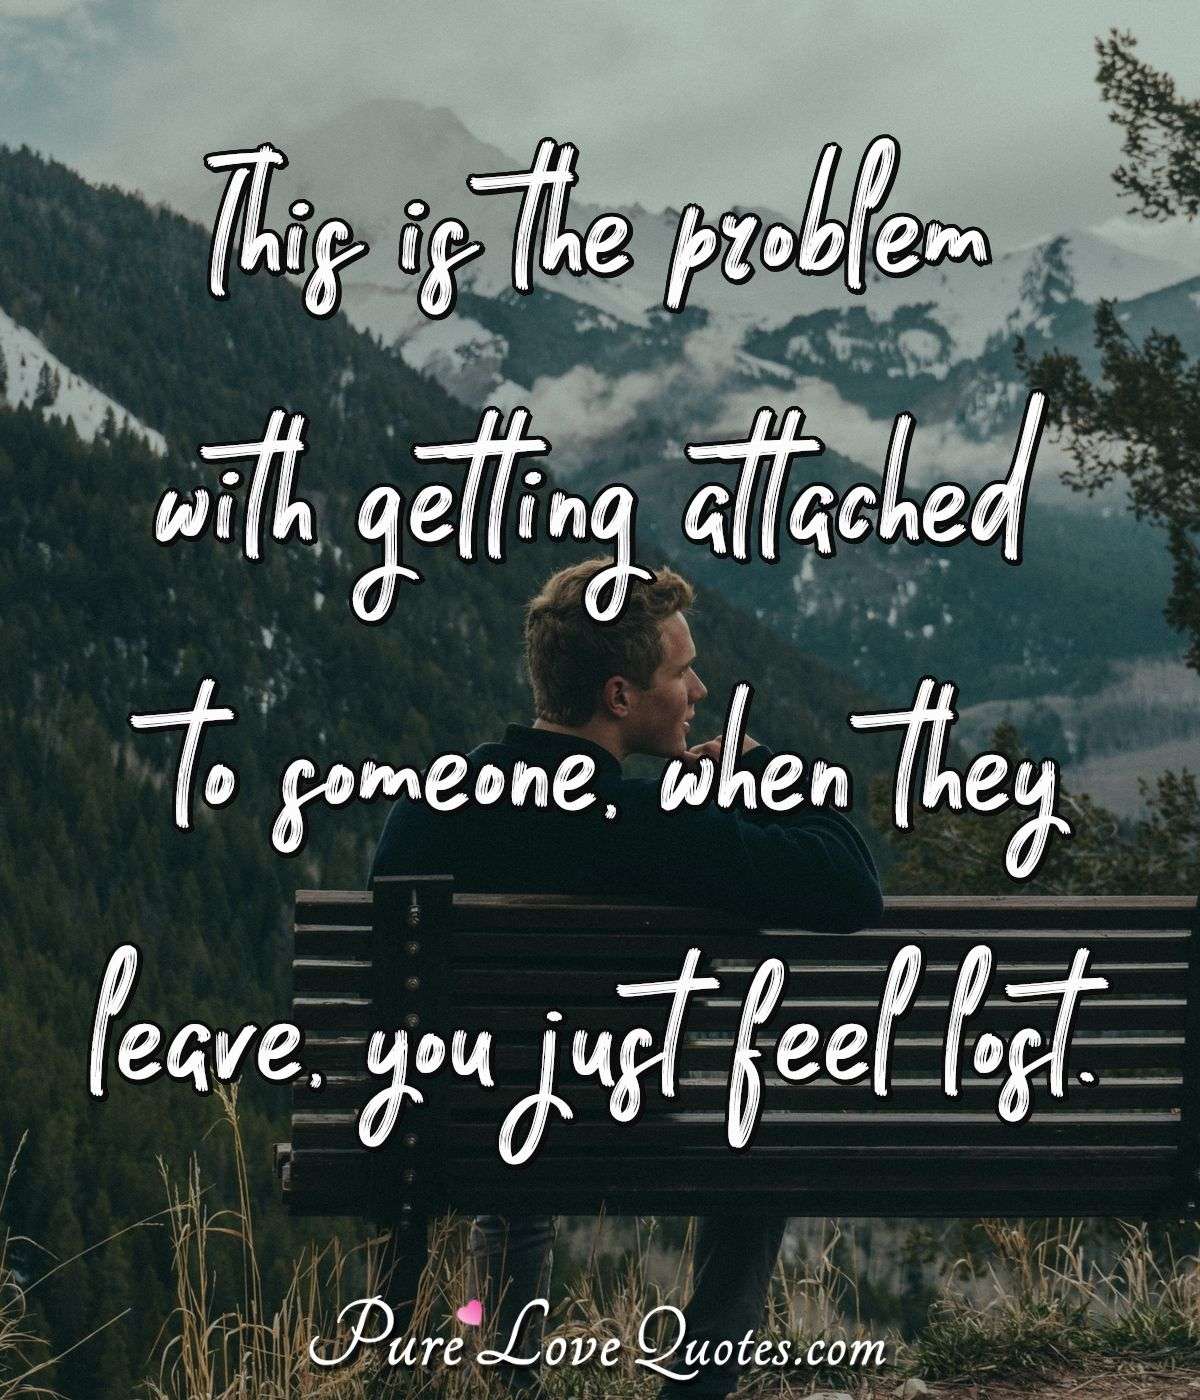 This is the problem with getting attached to someone, when they leave, you just feel lost. - Anonymous